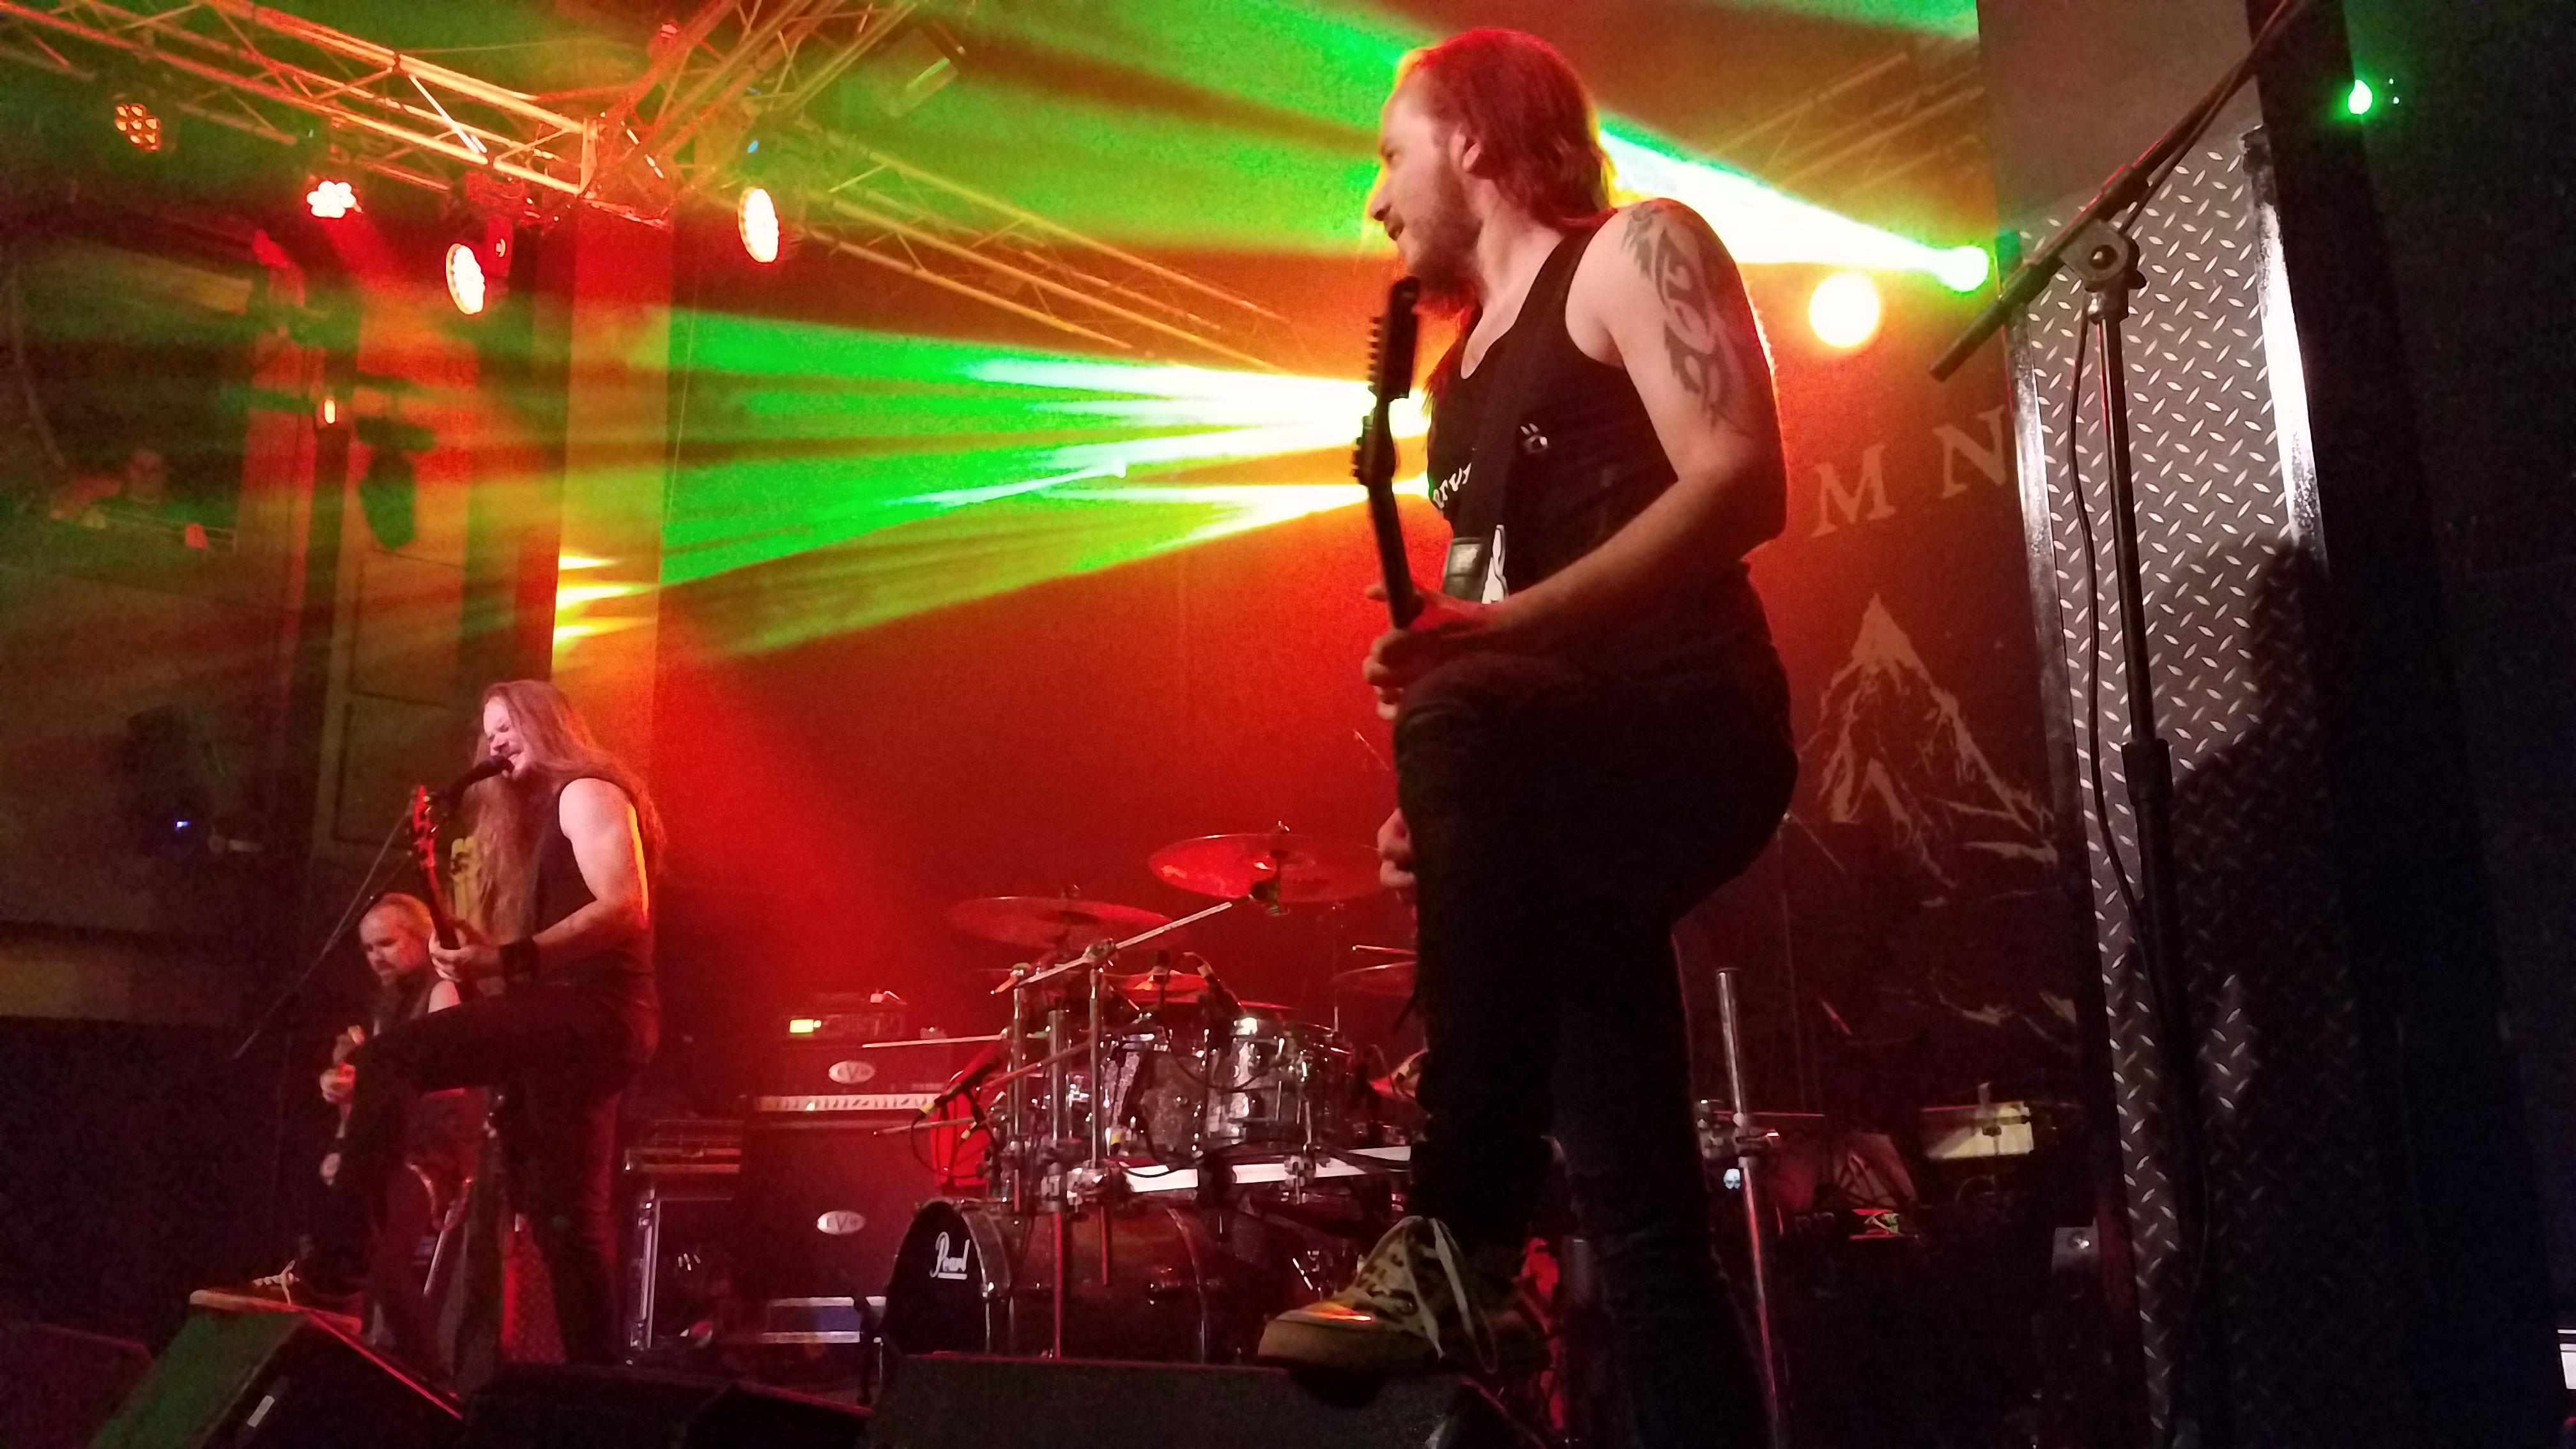 Joliet Received International Metal Attention As Insomnium, Lacuna Coil and Epica Play The Forge